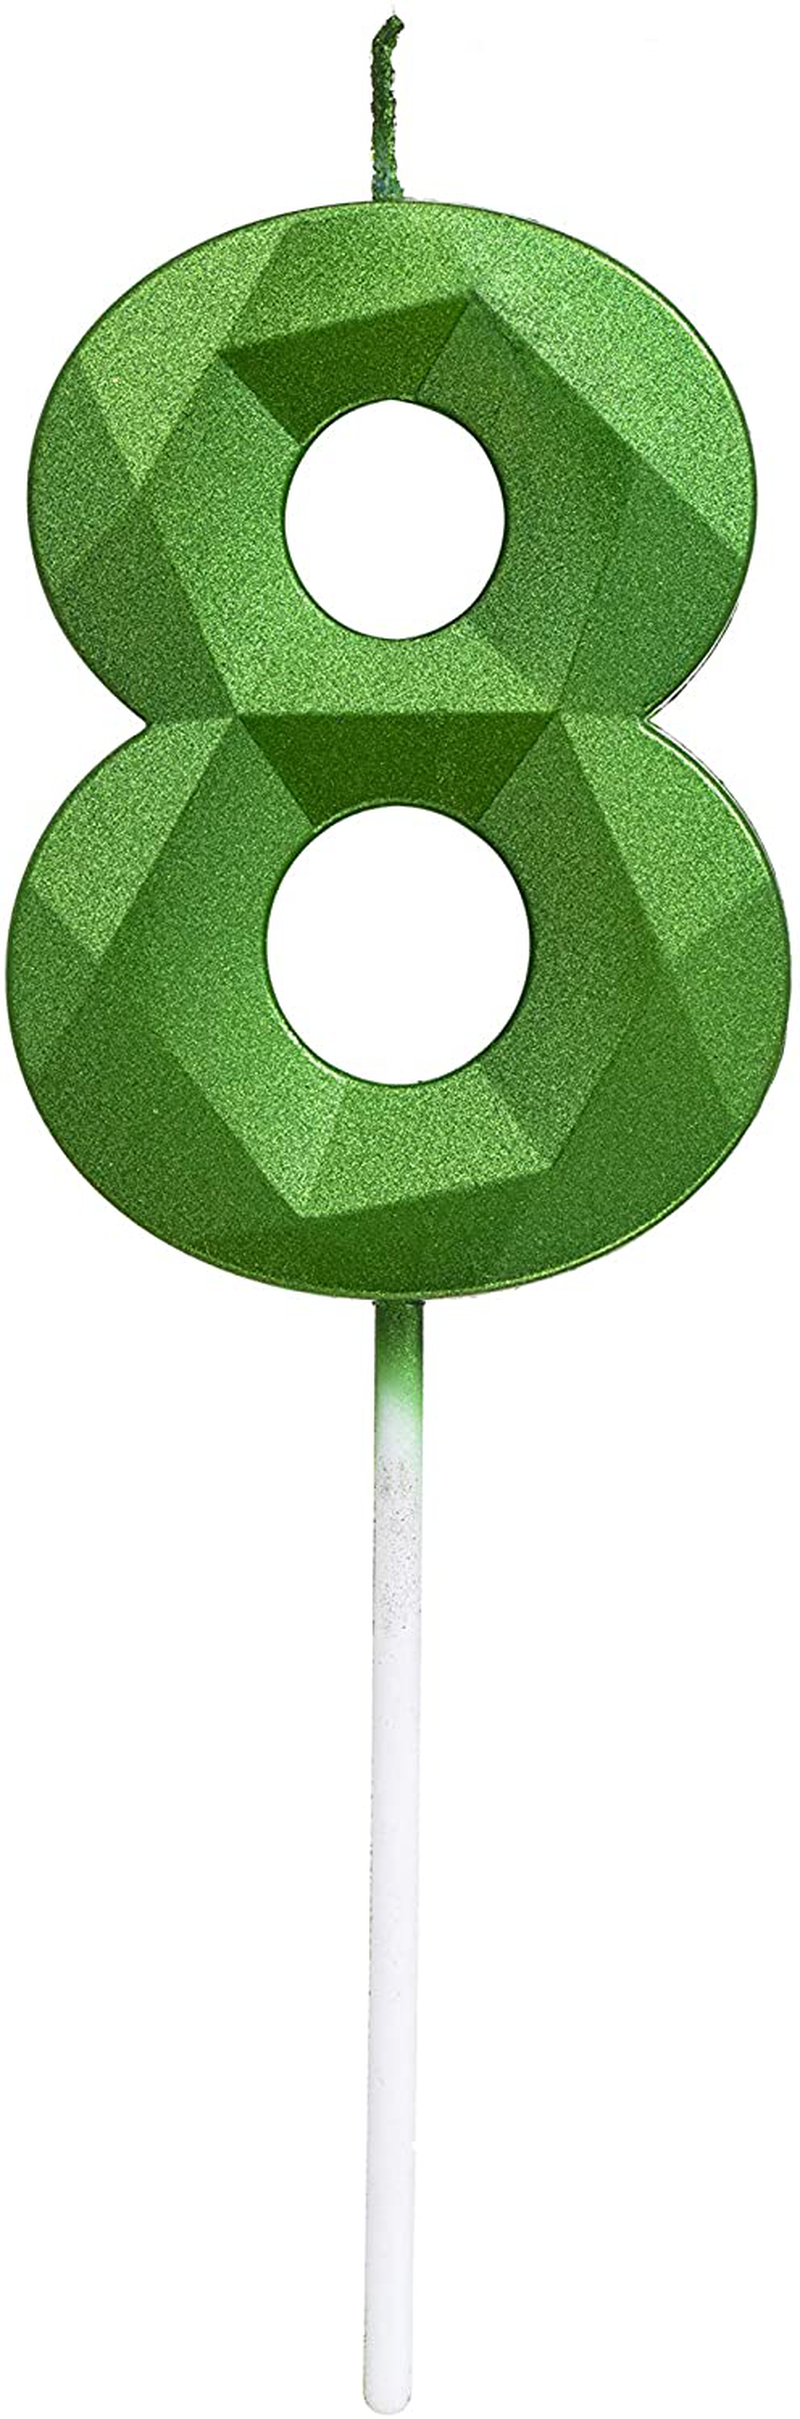 Green Happy Birthday Cake Candles,Wedding Cake Number Candles,3D Design Cake Topper Decoration for Party Kids Adults (Green Number 6) Home & Garden > Decor > Seasonal & Holiday Decorations& Garden > Decor > Seasonal & Holiday Decorations MEIMEI Green number 8 